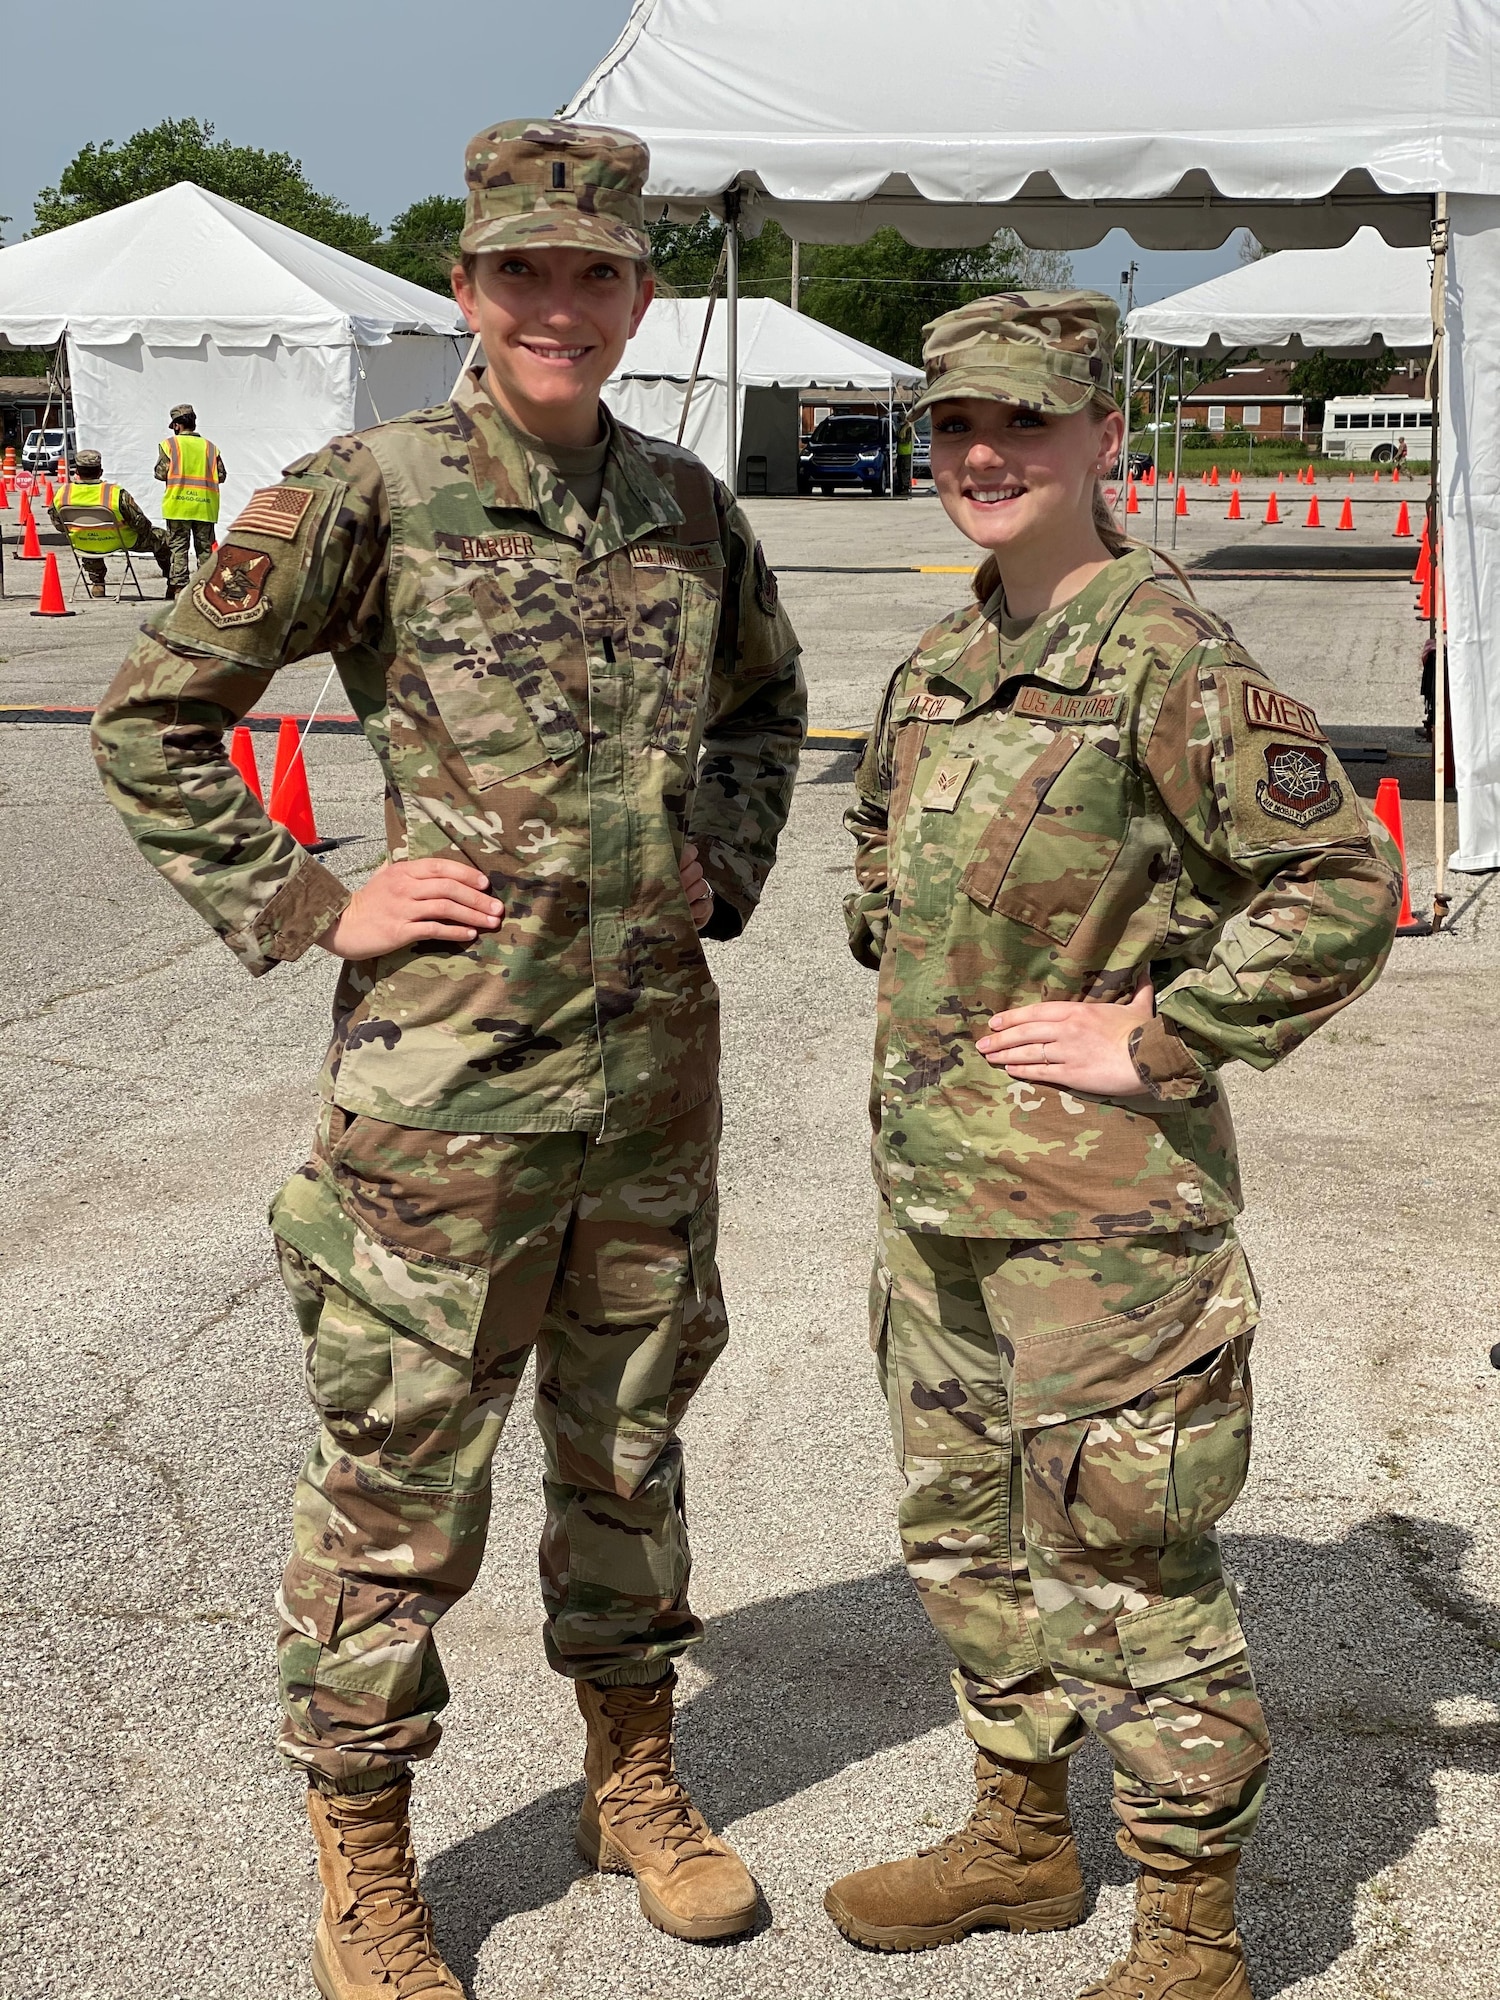 Two Airmen posing for a photo.